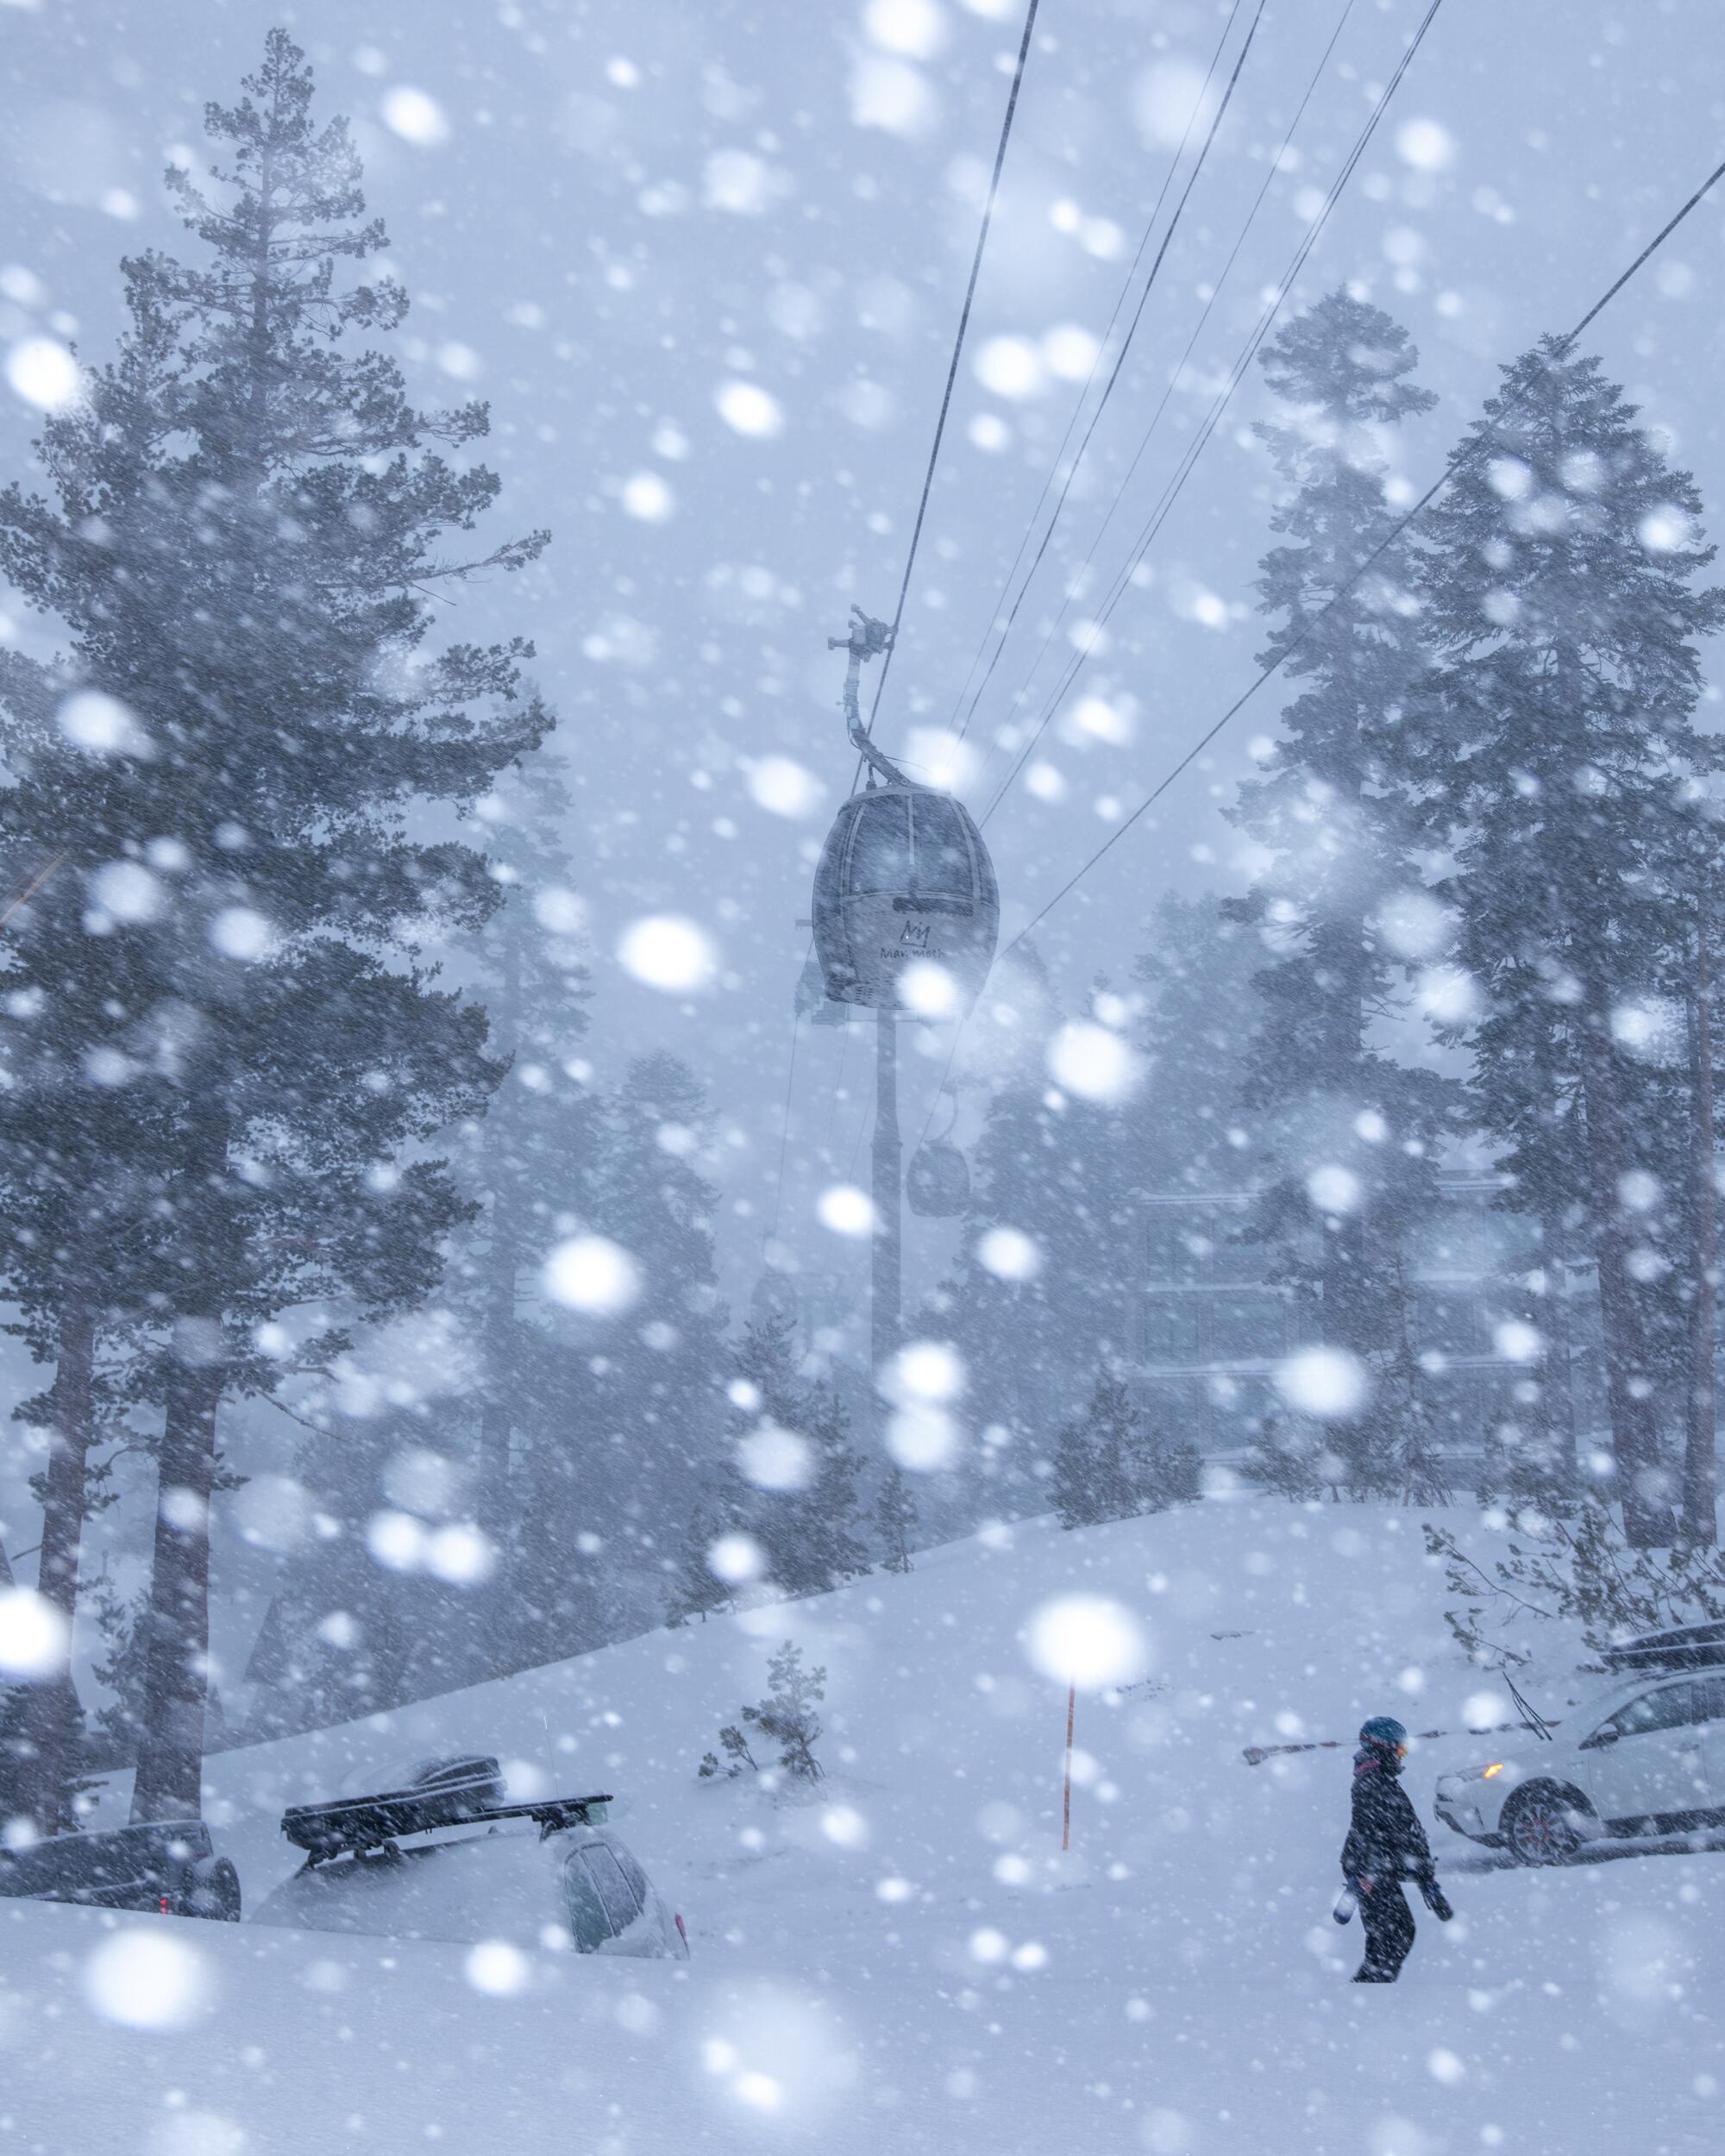 Snow falls on a scene of one person, pine trees, snow-covered ground and an aerial lift.